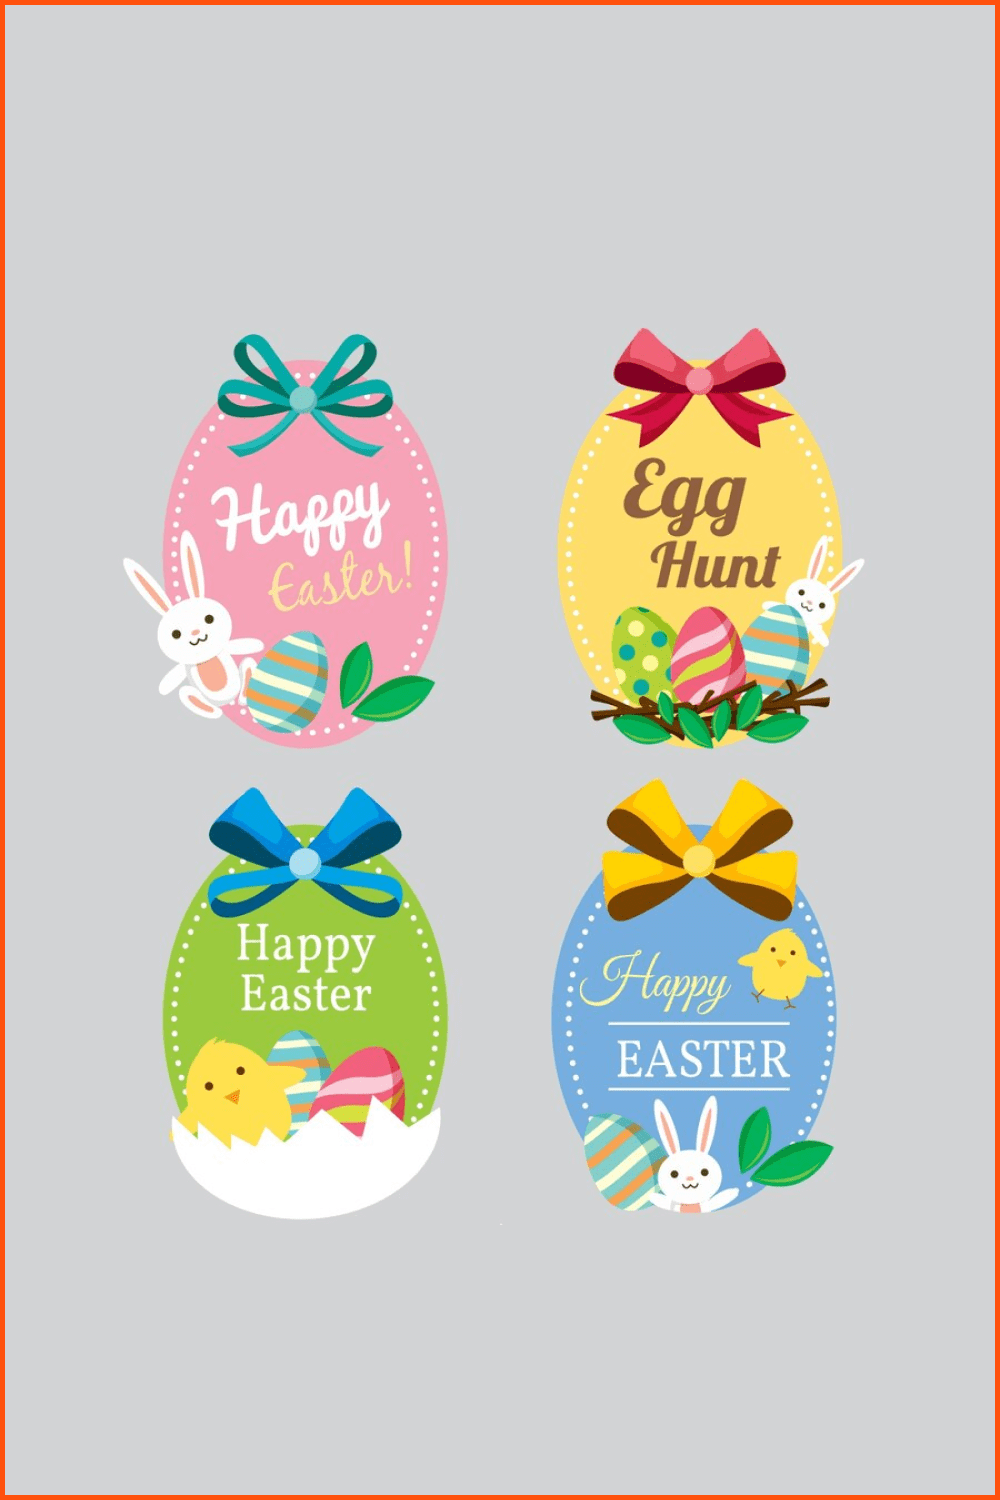 Stickers with happy Easter bows.